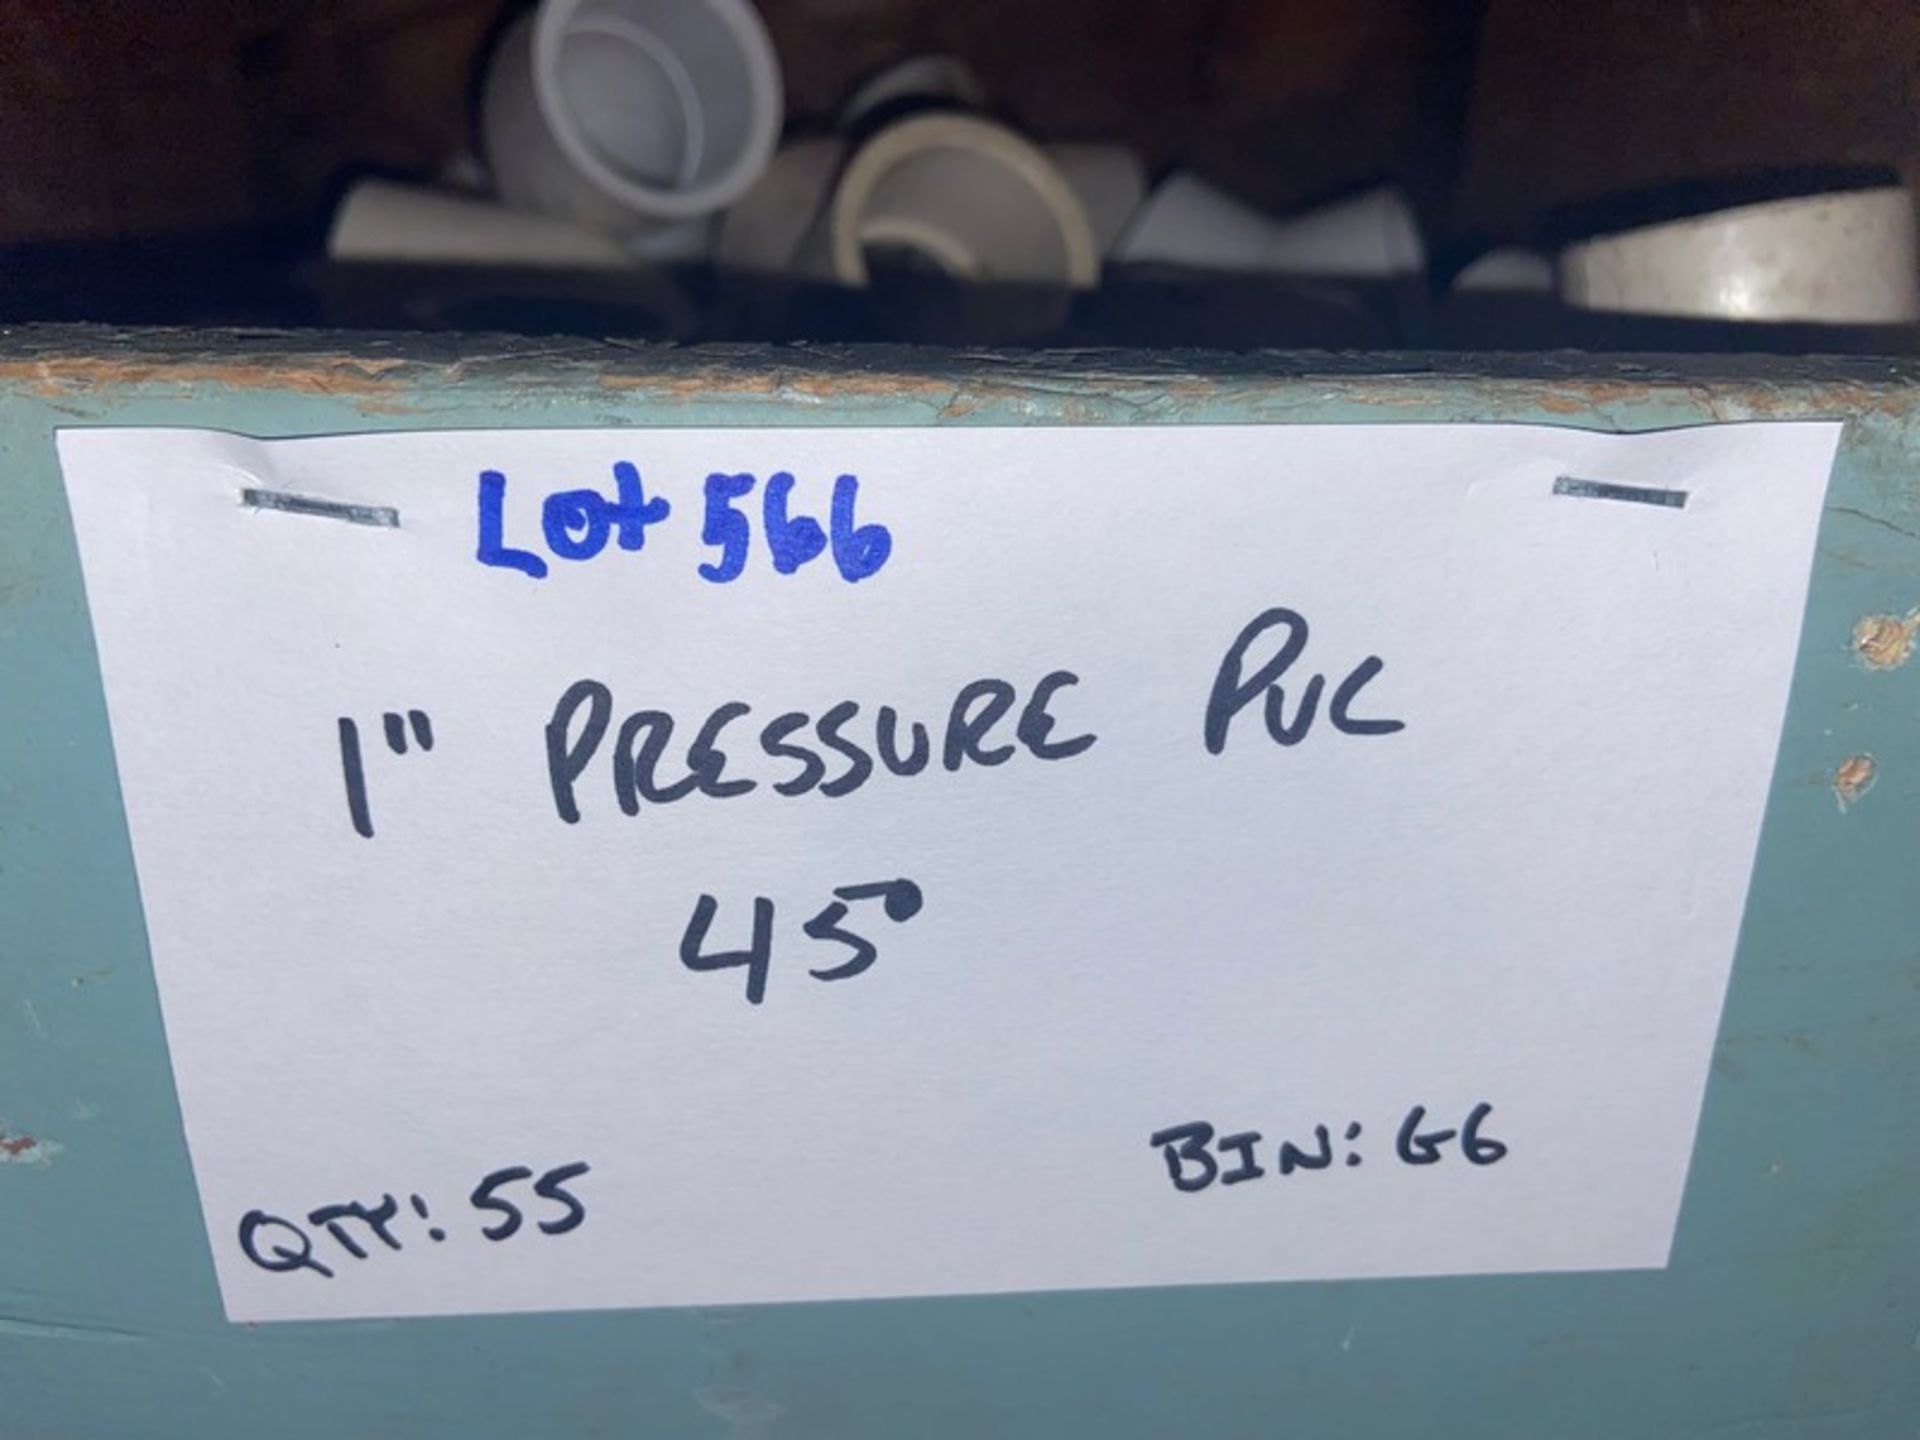 (55) 1” Pressure PVC 45’ (Bin:G6) (LOCATED IN MONROEVILLE, PA) - Image 4 of 7